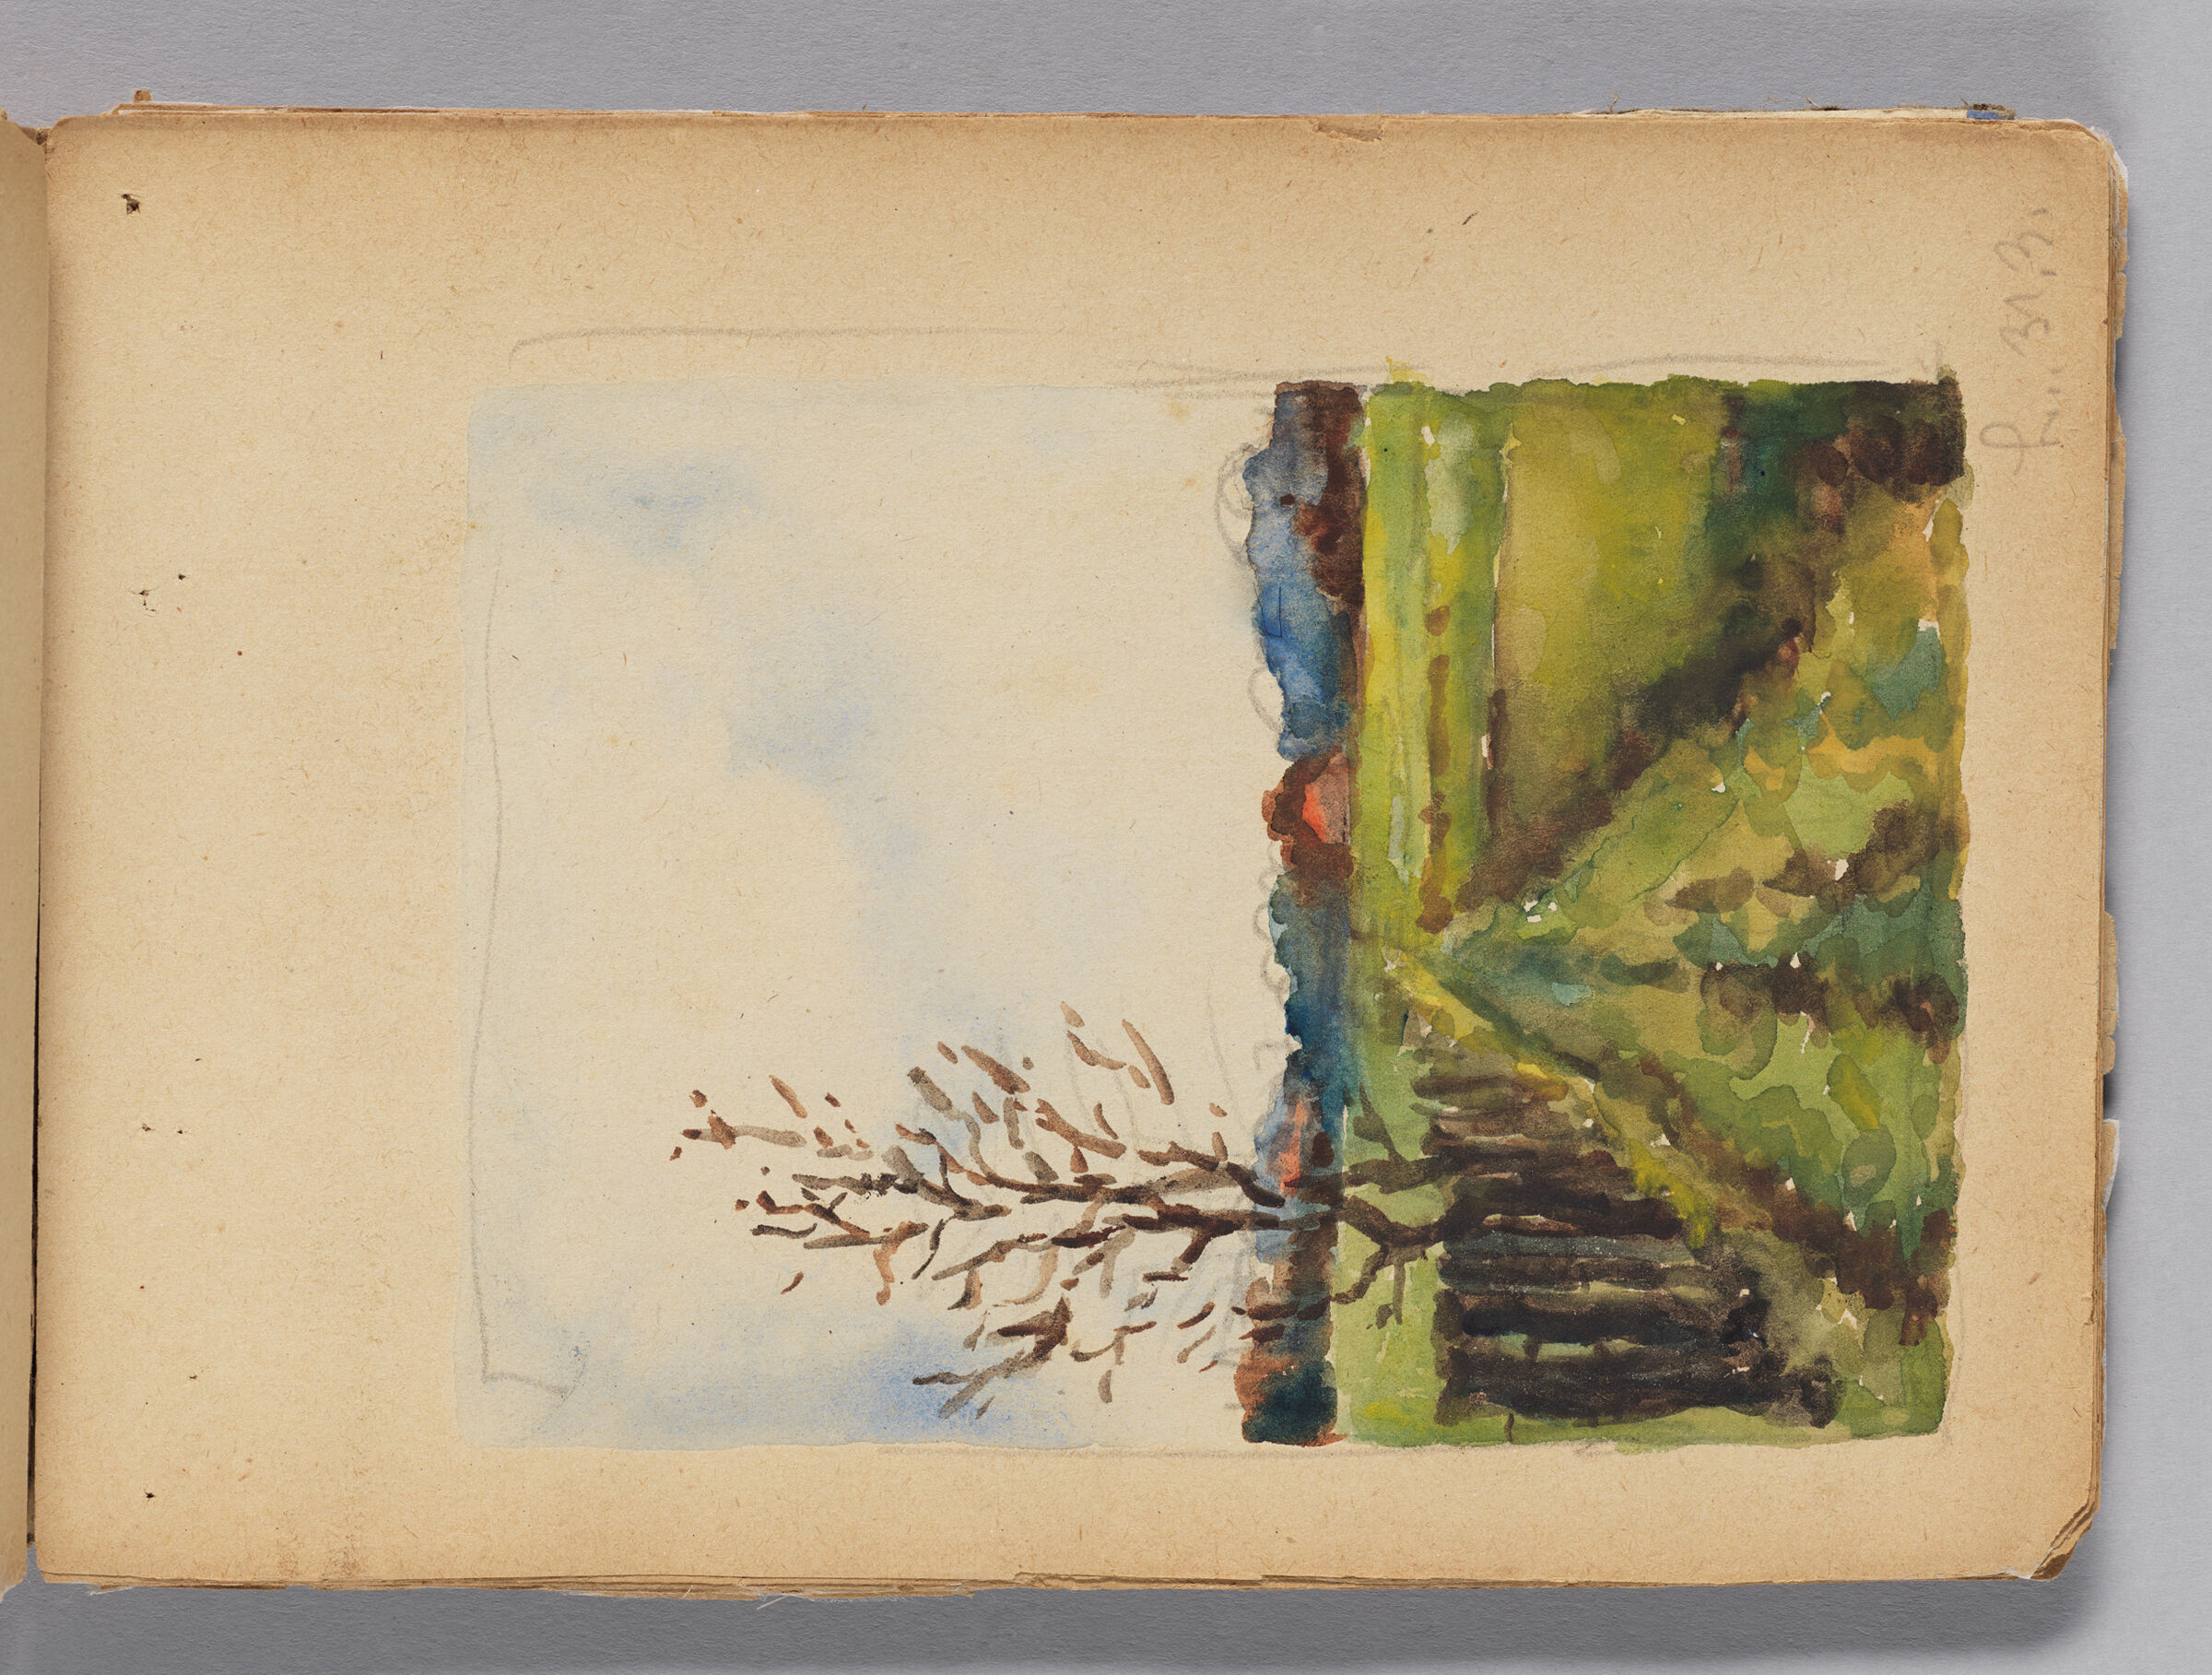 Untitled (Blank With Stray Marks, Left Page); Untitled (Farm Landscape, Right Page)